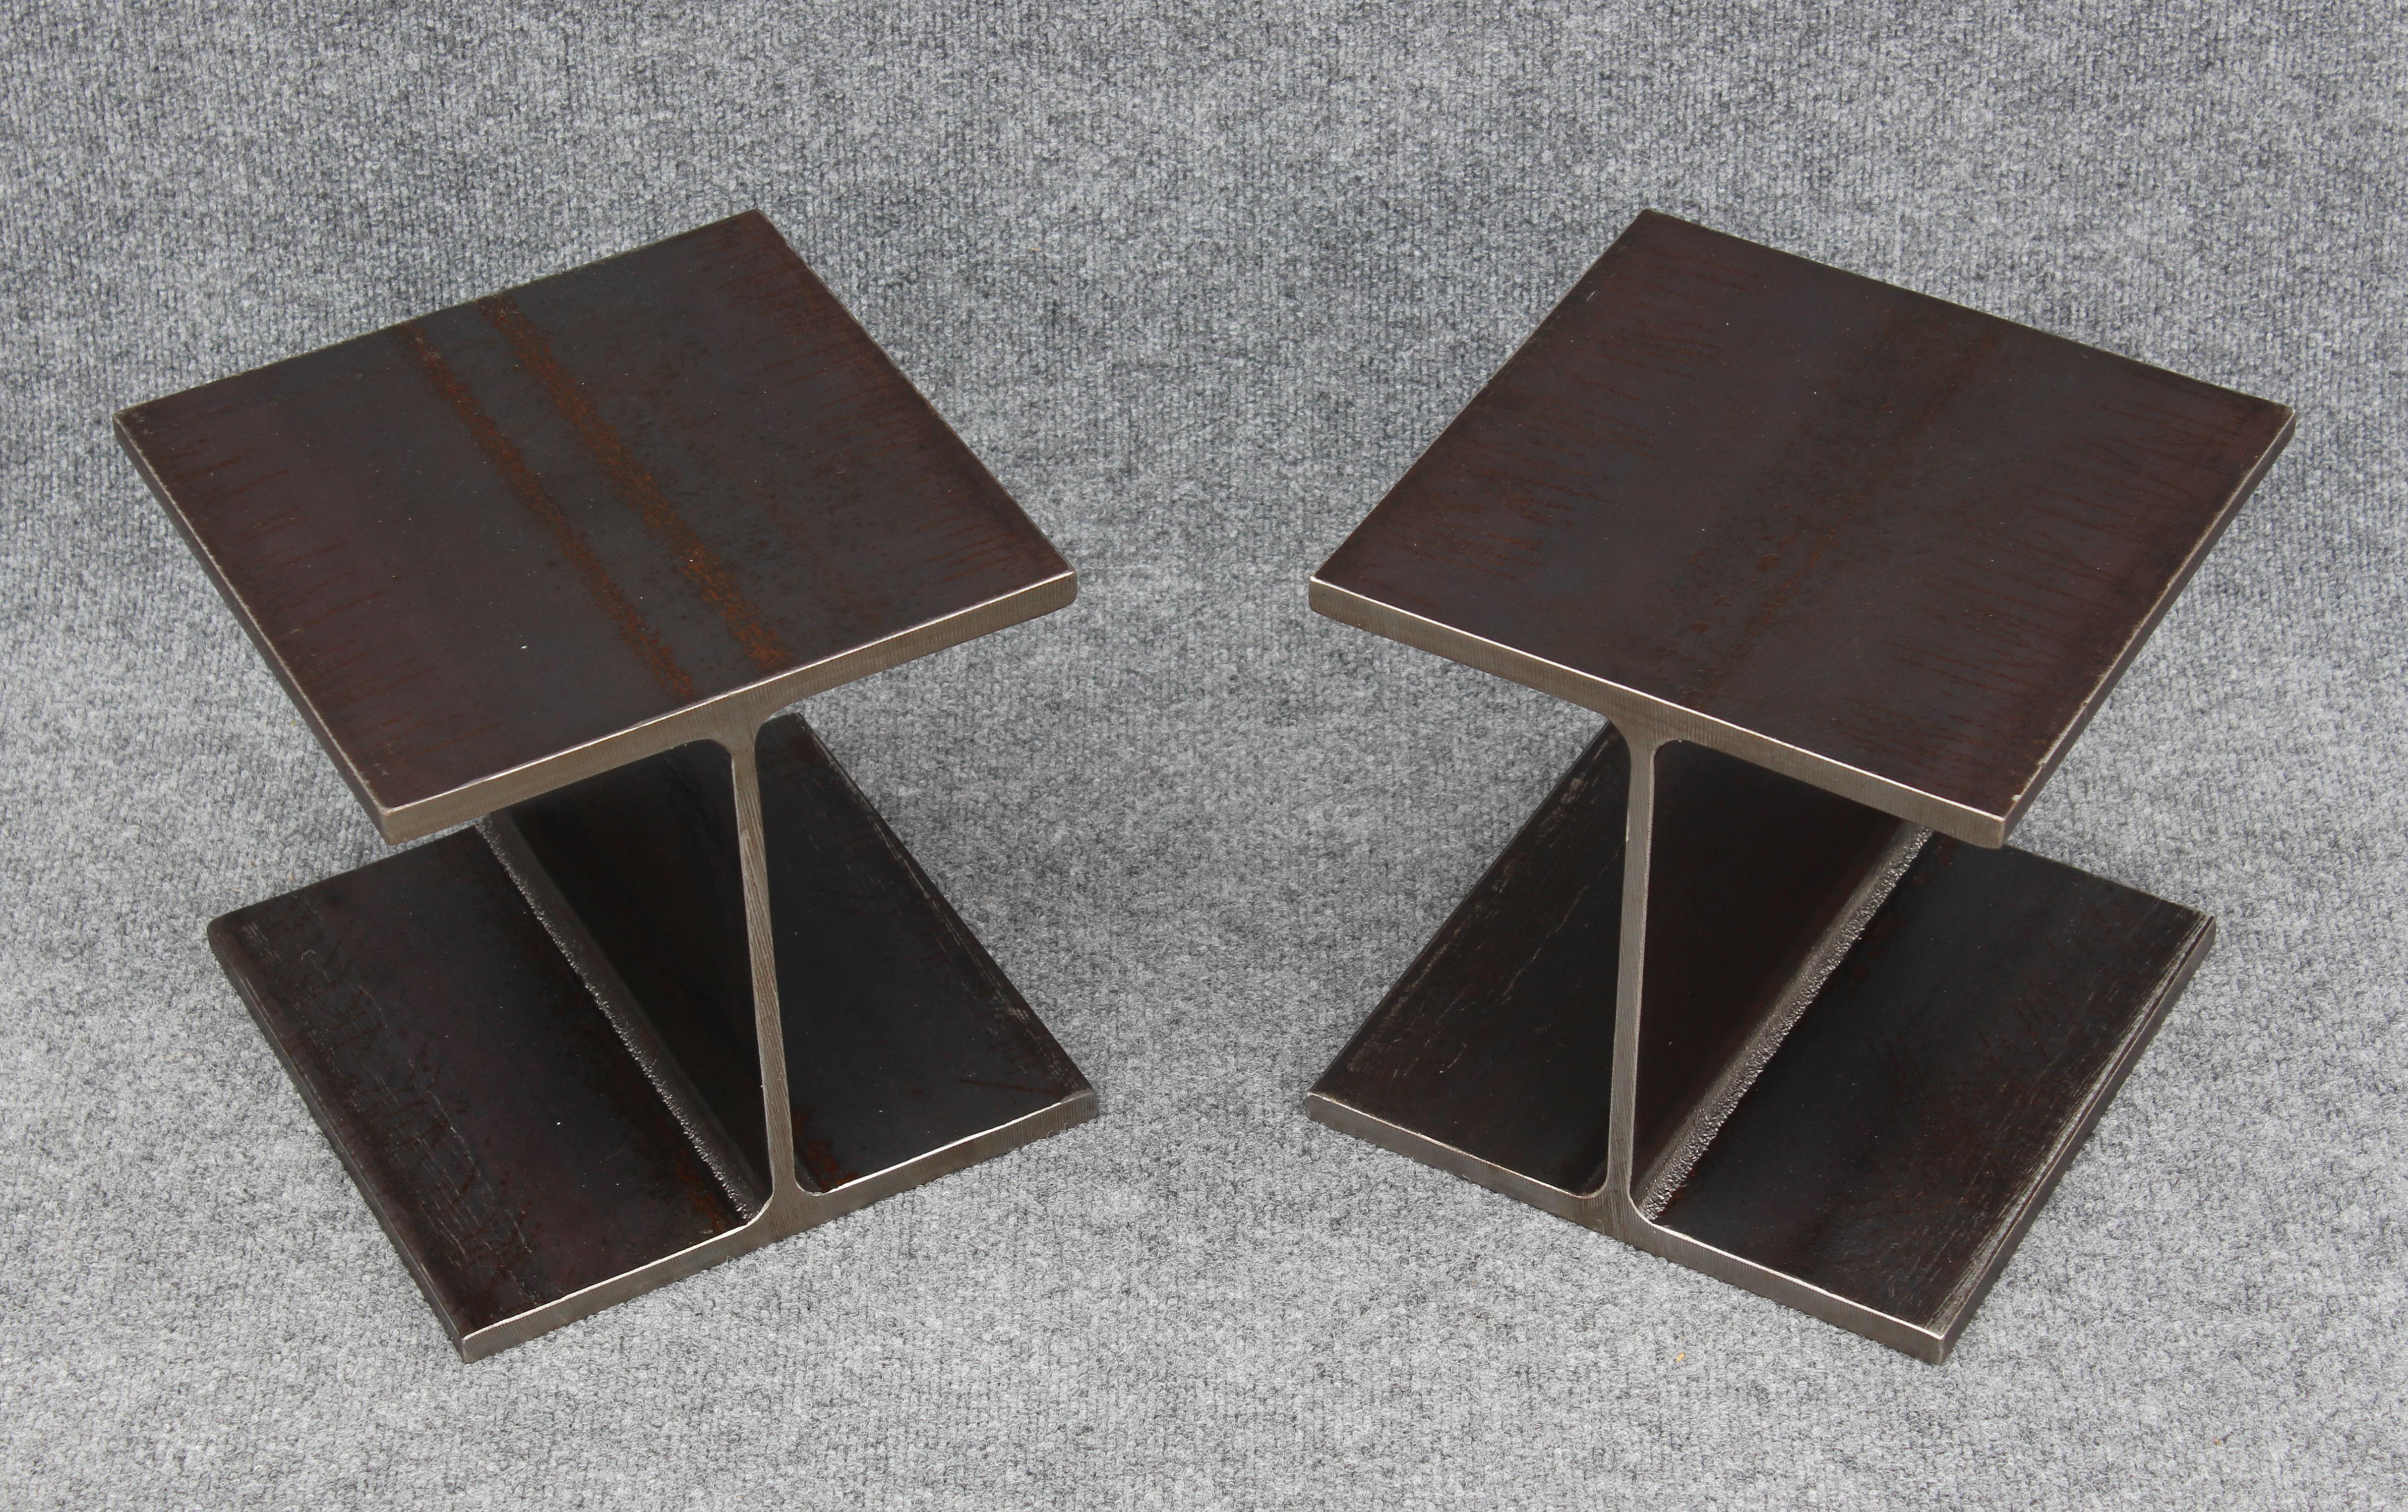 In creating a prototype, Ward Bennett actually cut off a section of a steel I-beam to achieve the raw aesthetic he was after. Here, a pair of solid enameled steel side tables after his innovative design. Each is very well made, with crisp surfaces